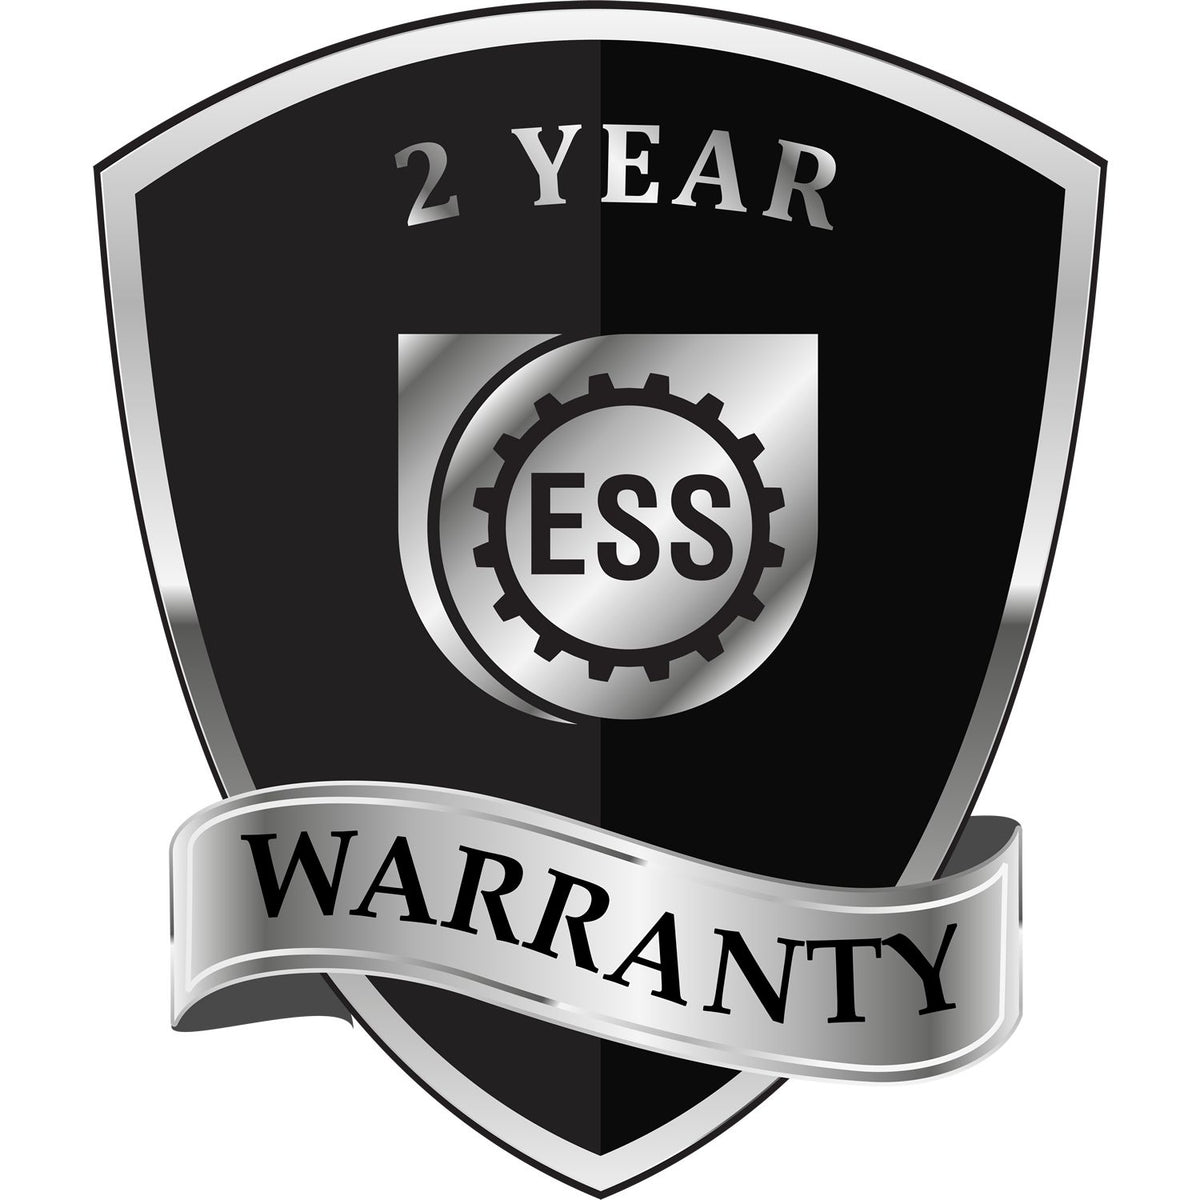 A black and silver badge or emblem showing warranty information for the State of Utah Extended Long Reach Geologist Seal